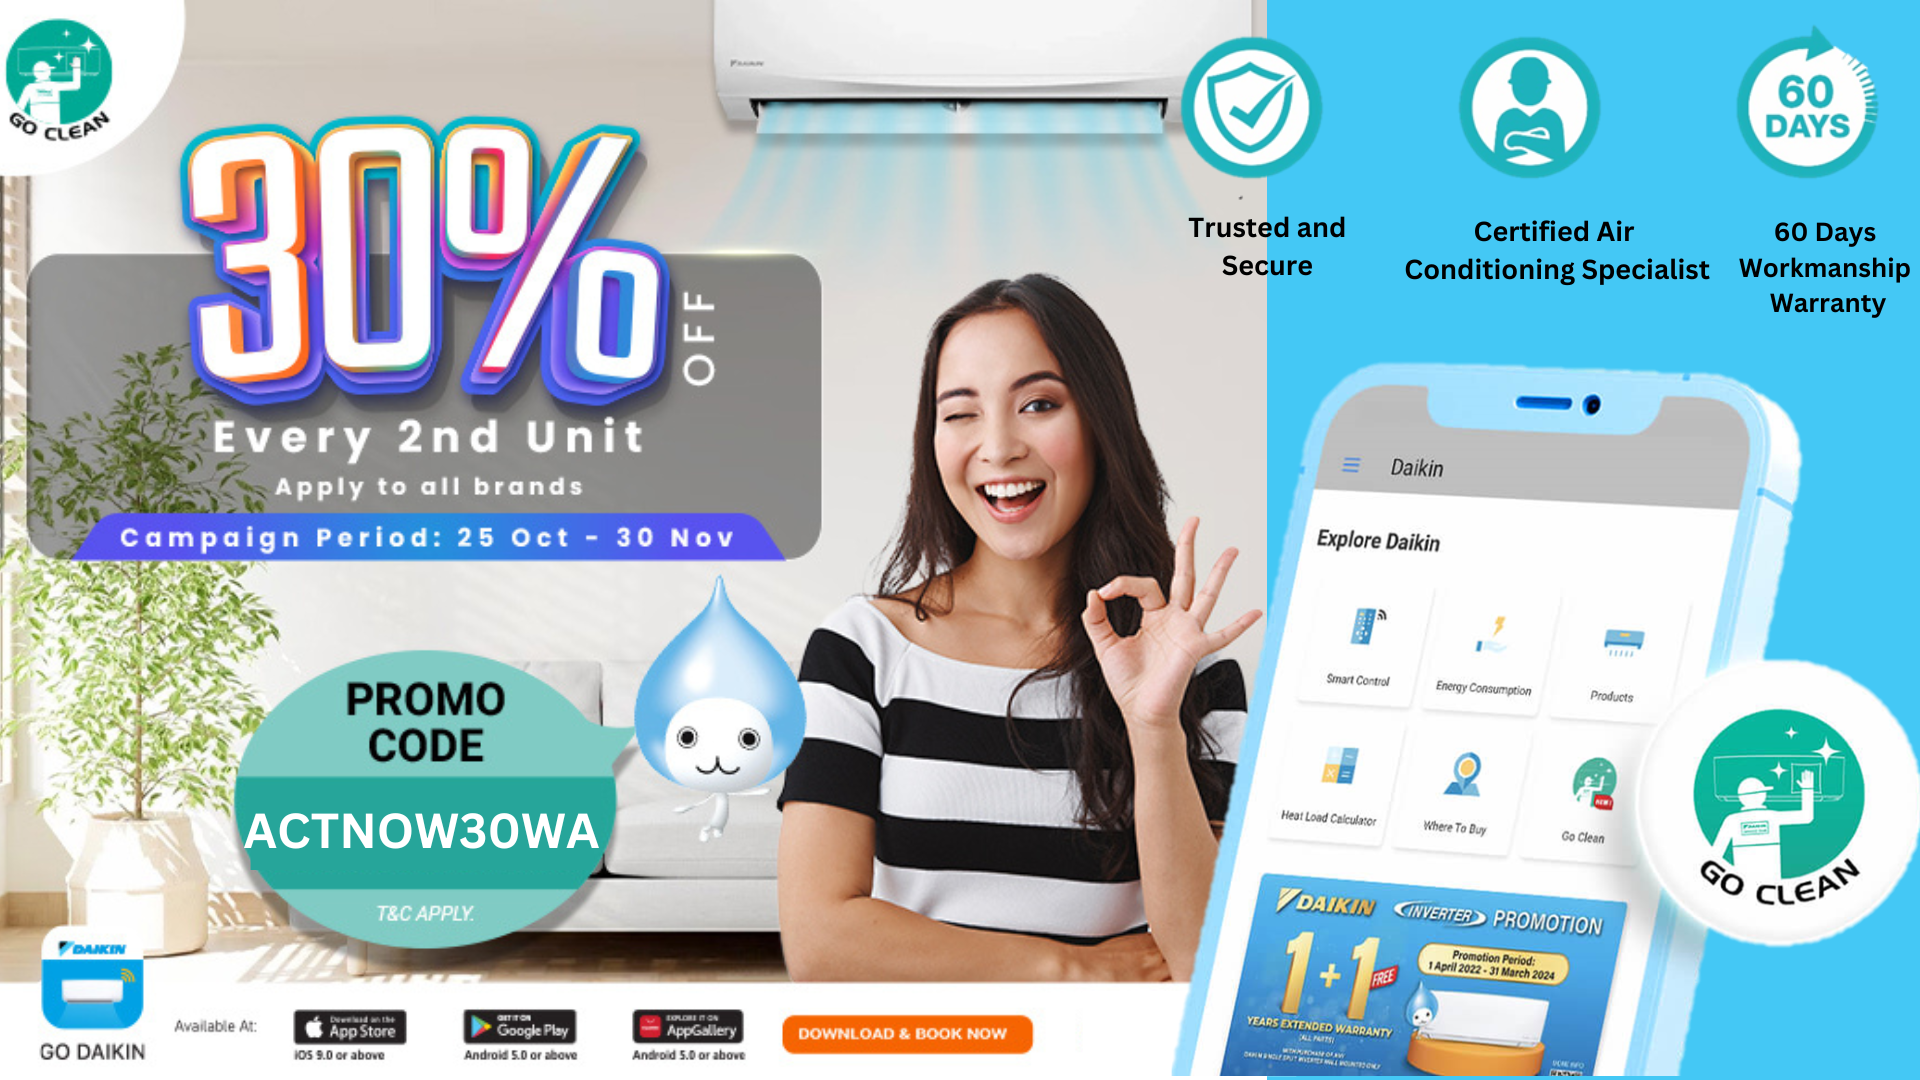 ACTNOW30WA Get 30% Off 2nd Unit For Every 2 Units | Daikin Malaysia